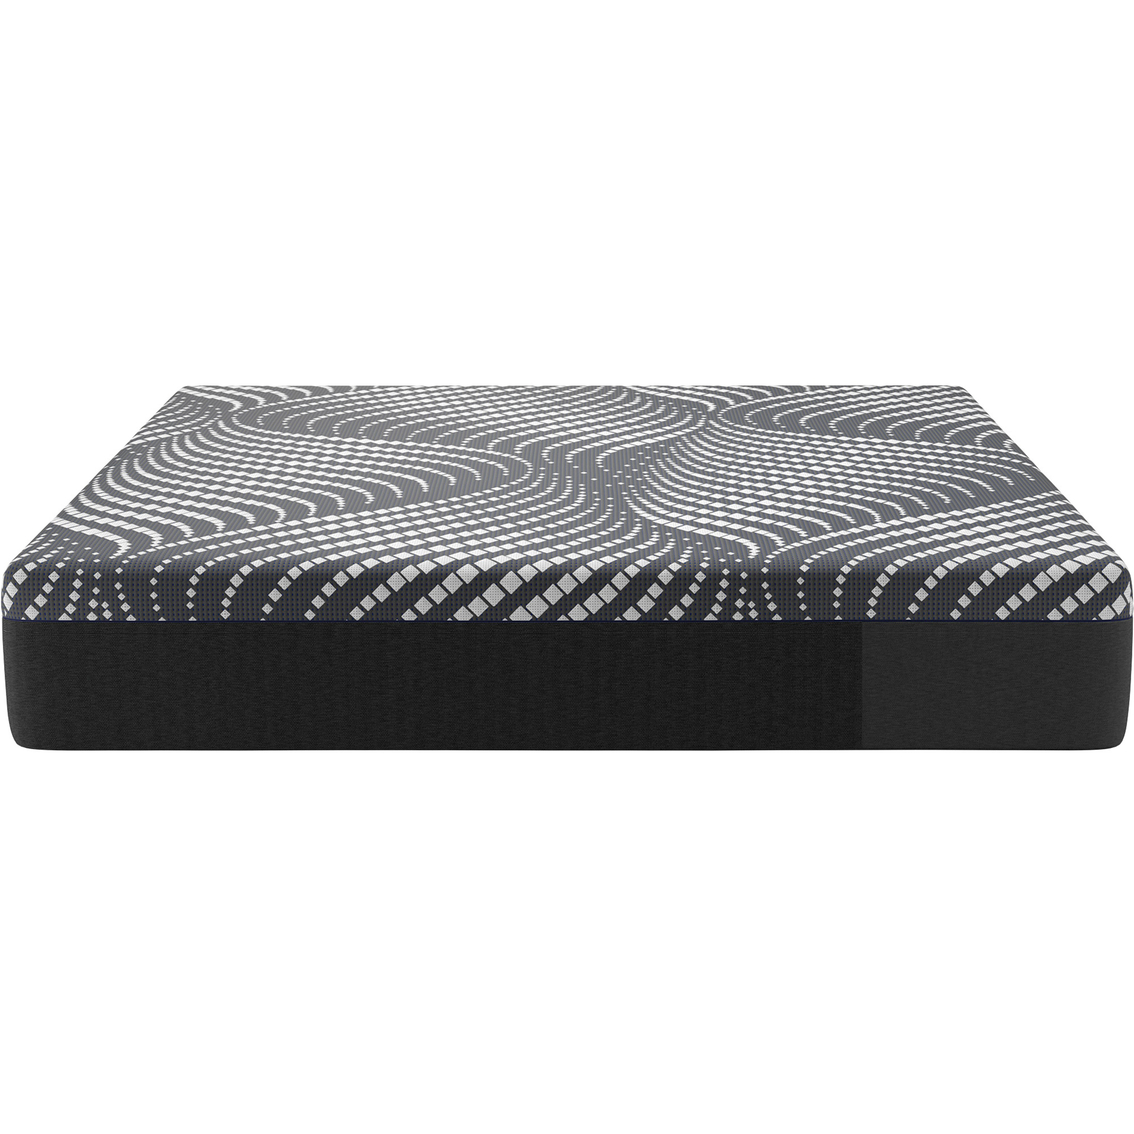 Sealy Posturepedic Plus Hybrid High Point Mattress Firm - Image 3 of 3